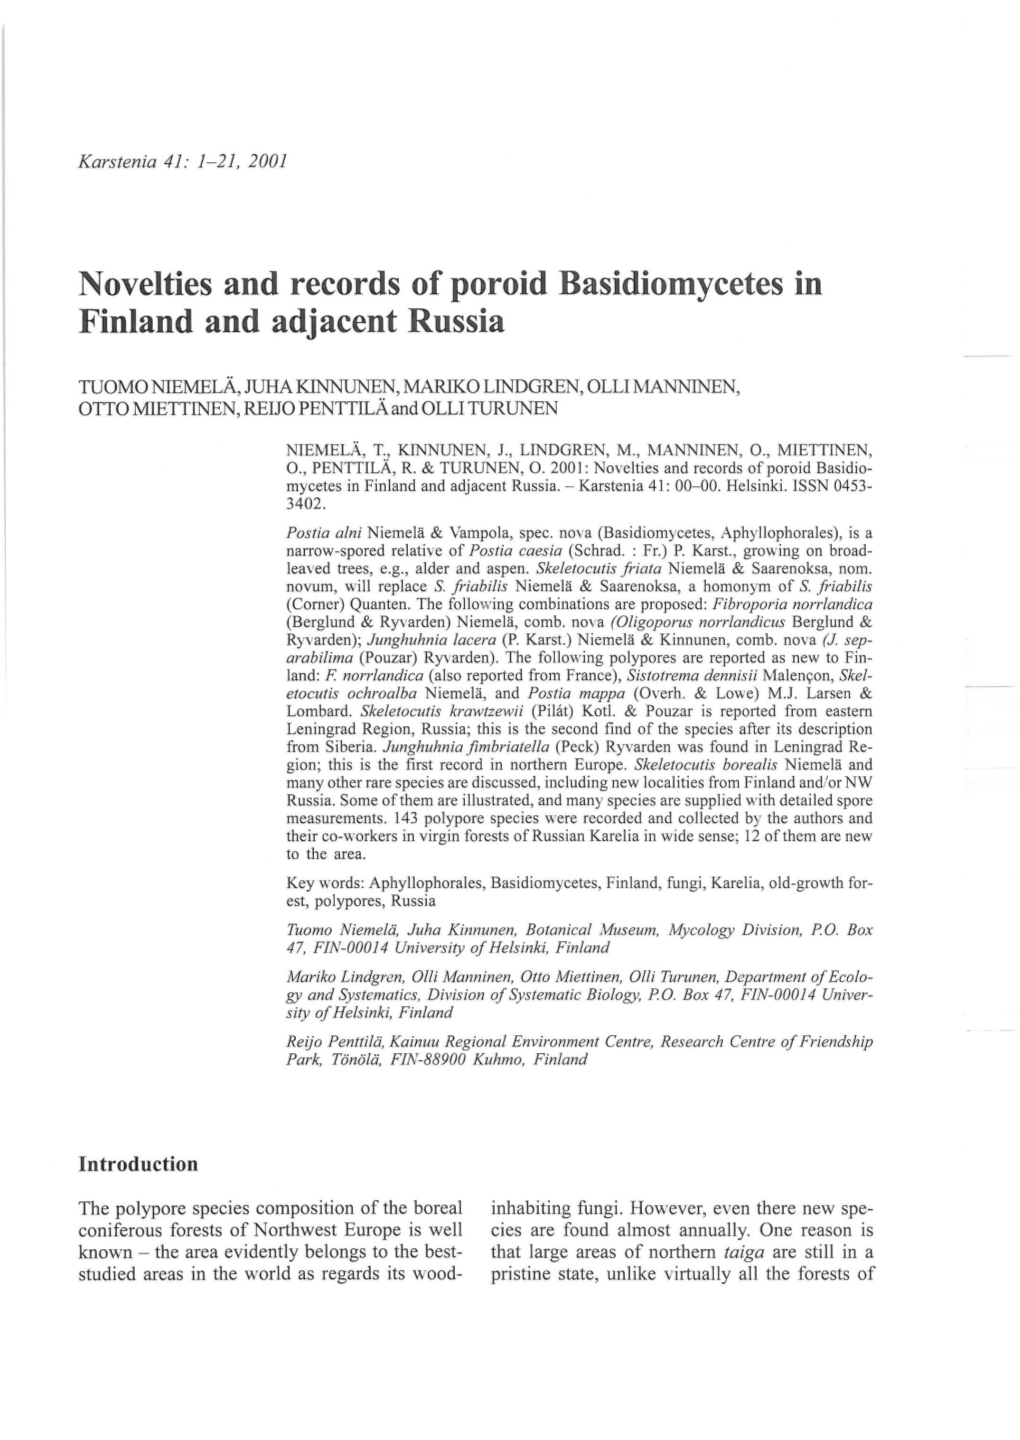 Novelties and Records of Poroid Basidiomycetes in Finland and Adjacent Russia